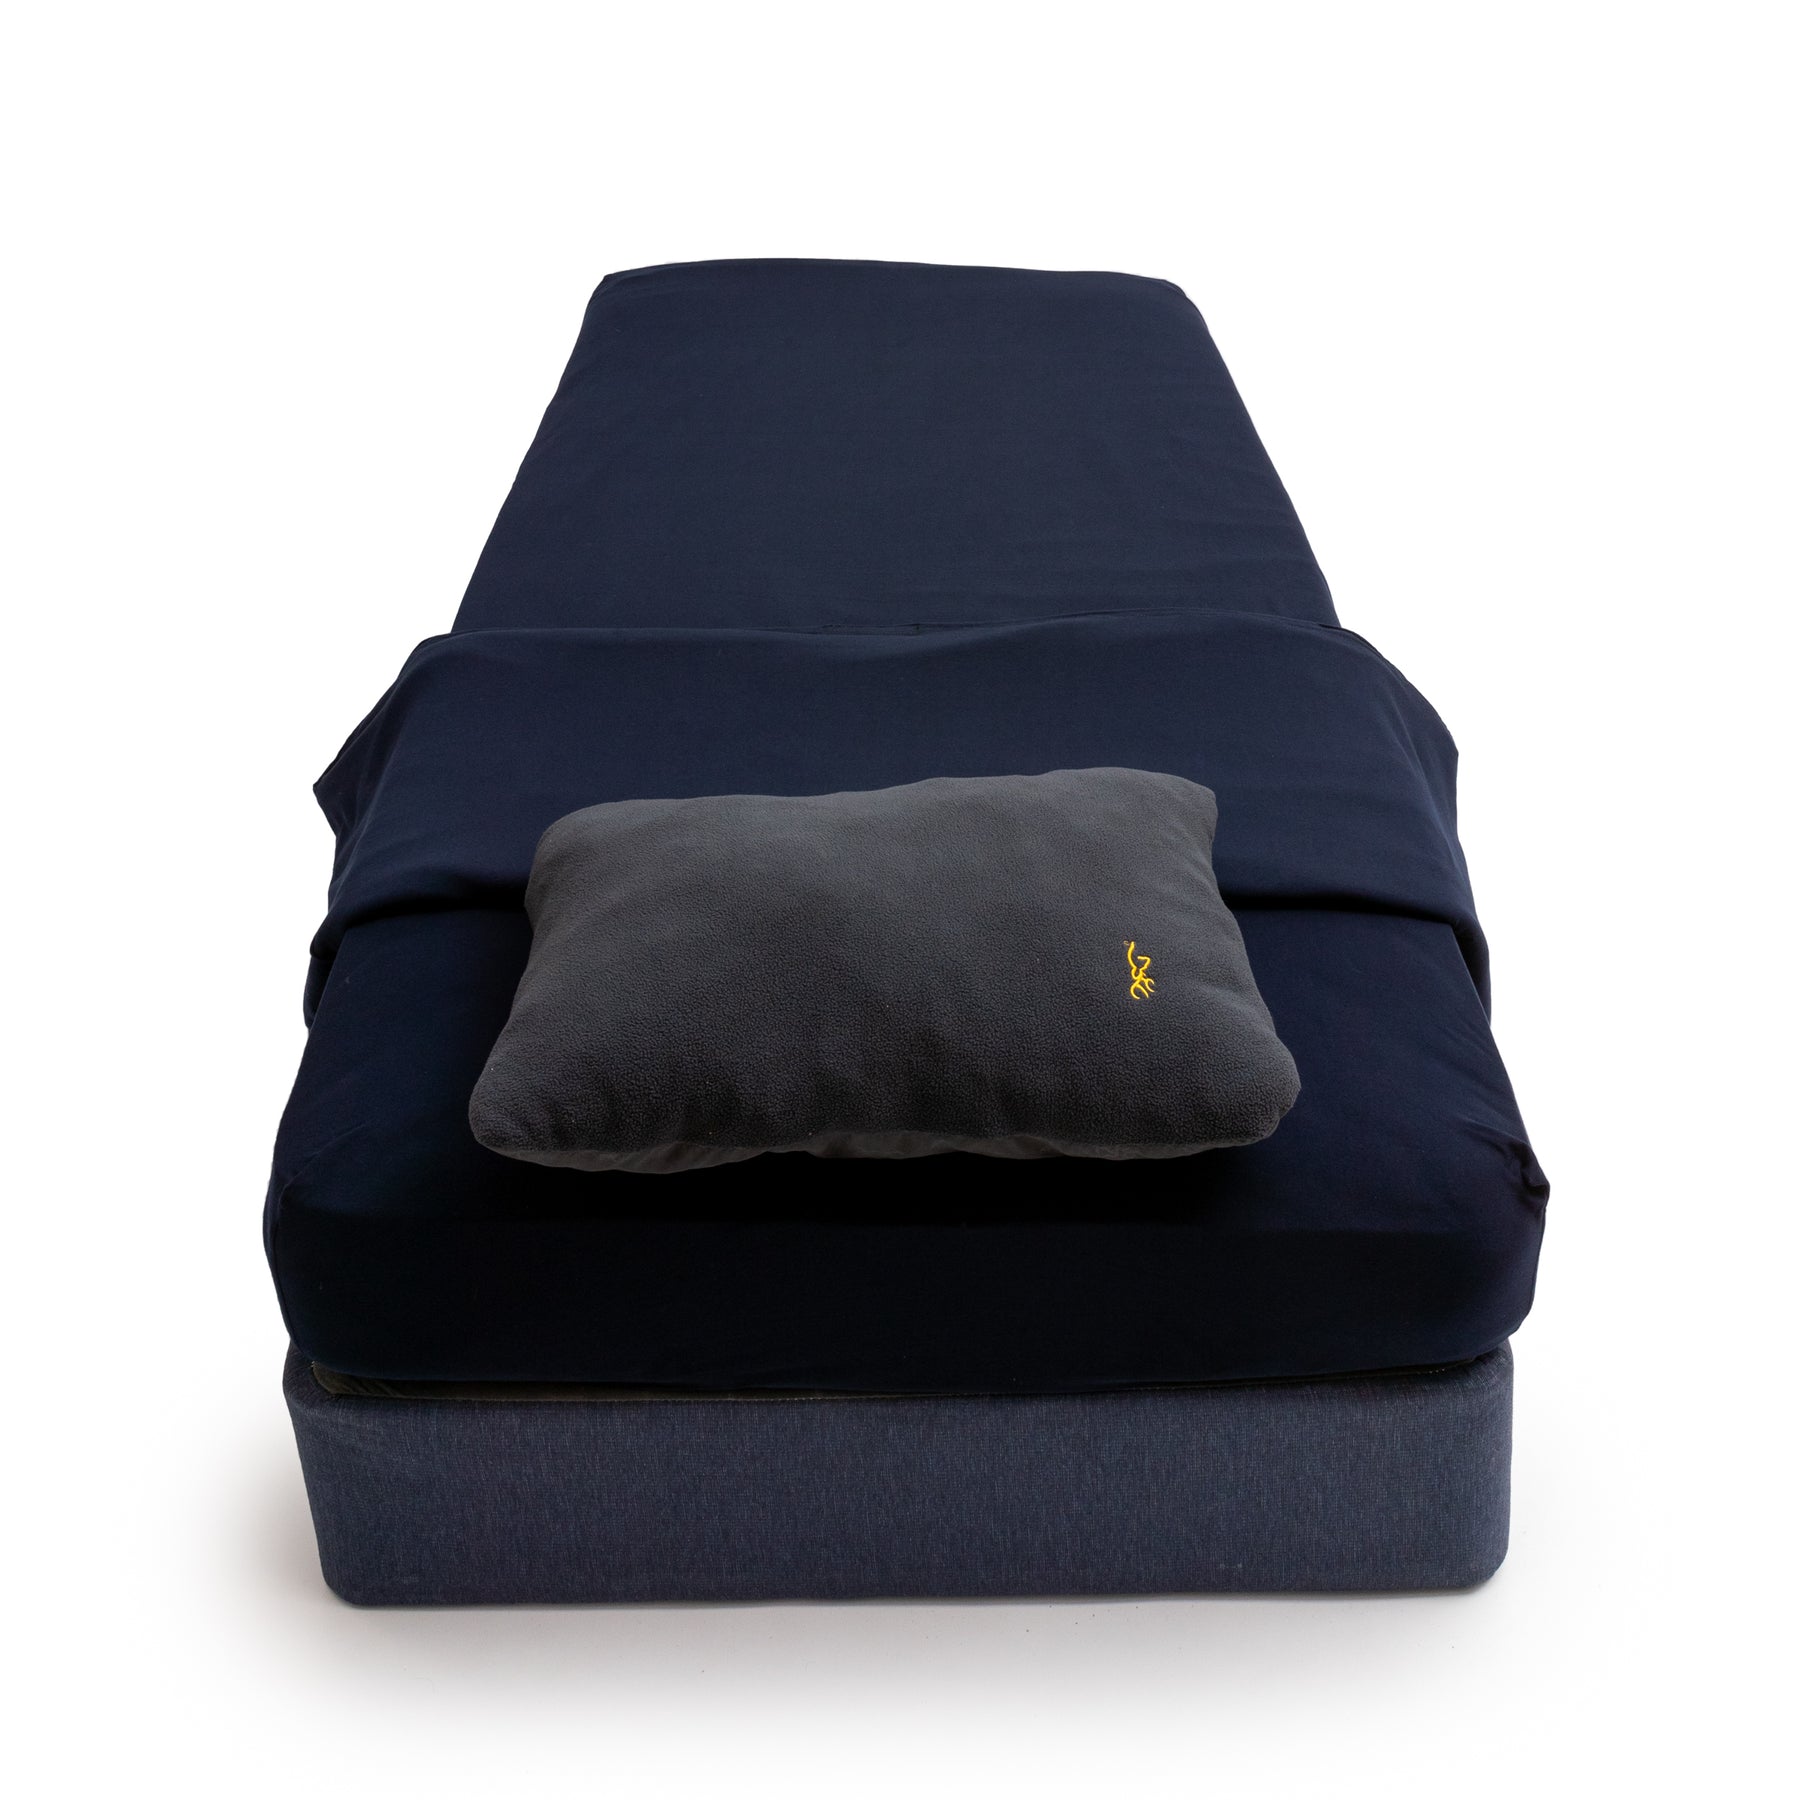 STATION BEDPAC™ *w/ free camp pillow